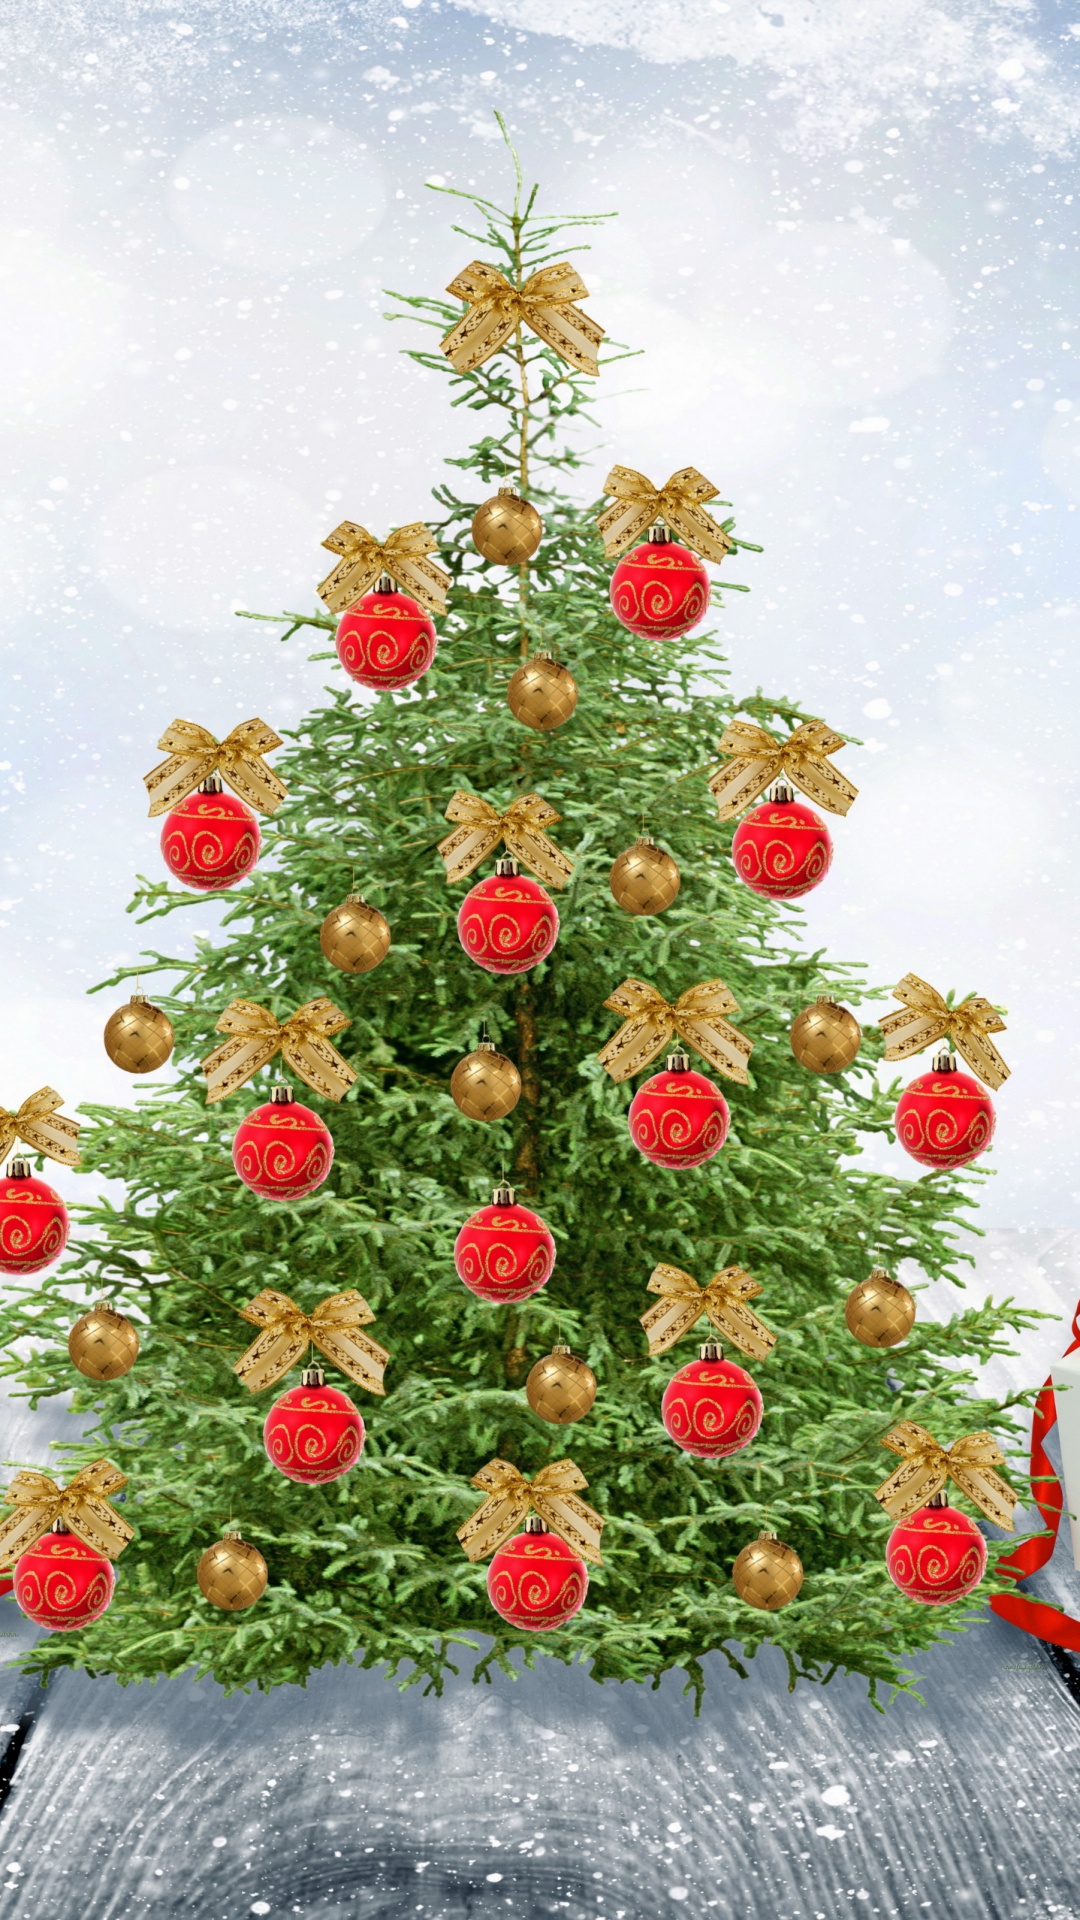 New Year, Christmas Day, Santa Claus, Christmas Tree, Christmas Decoration. Wallpaper in 1080x1920 Resolution